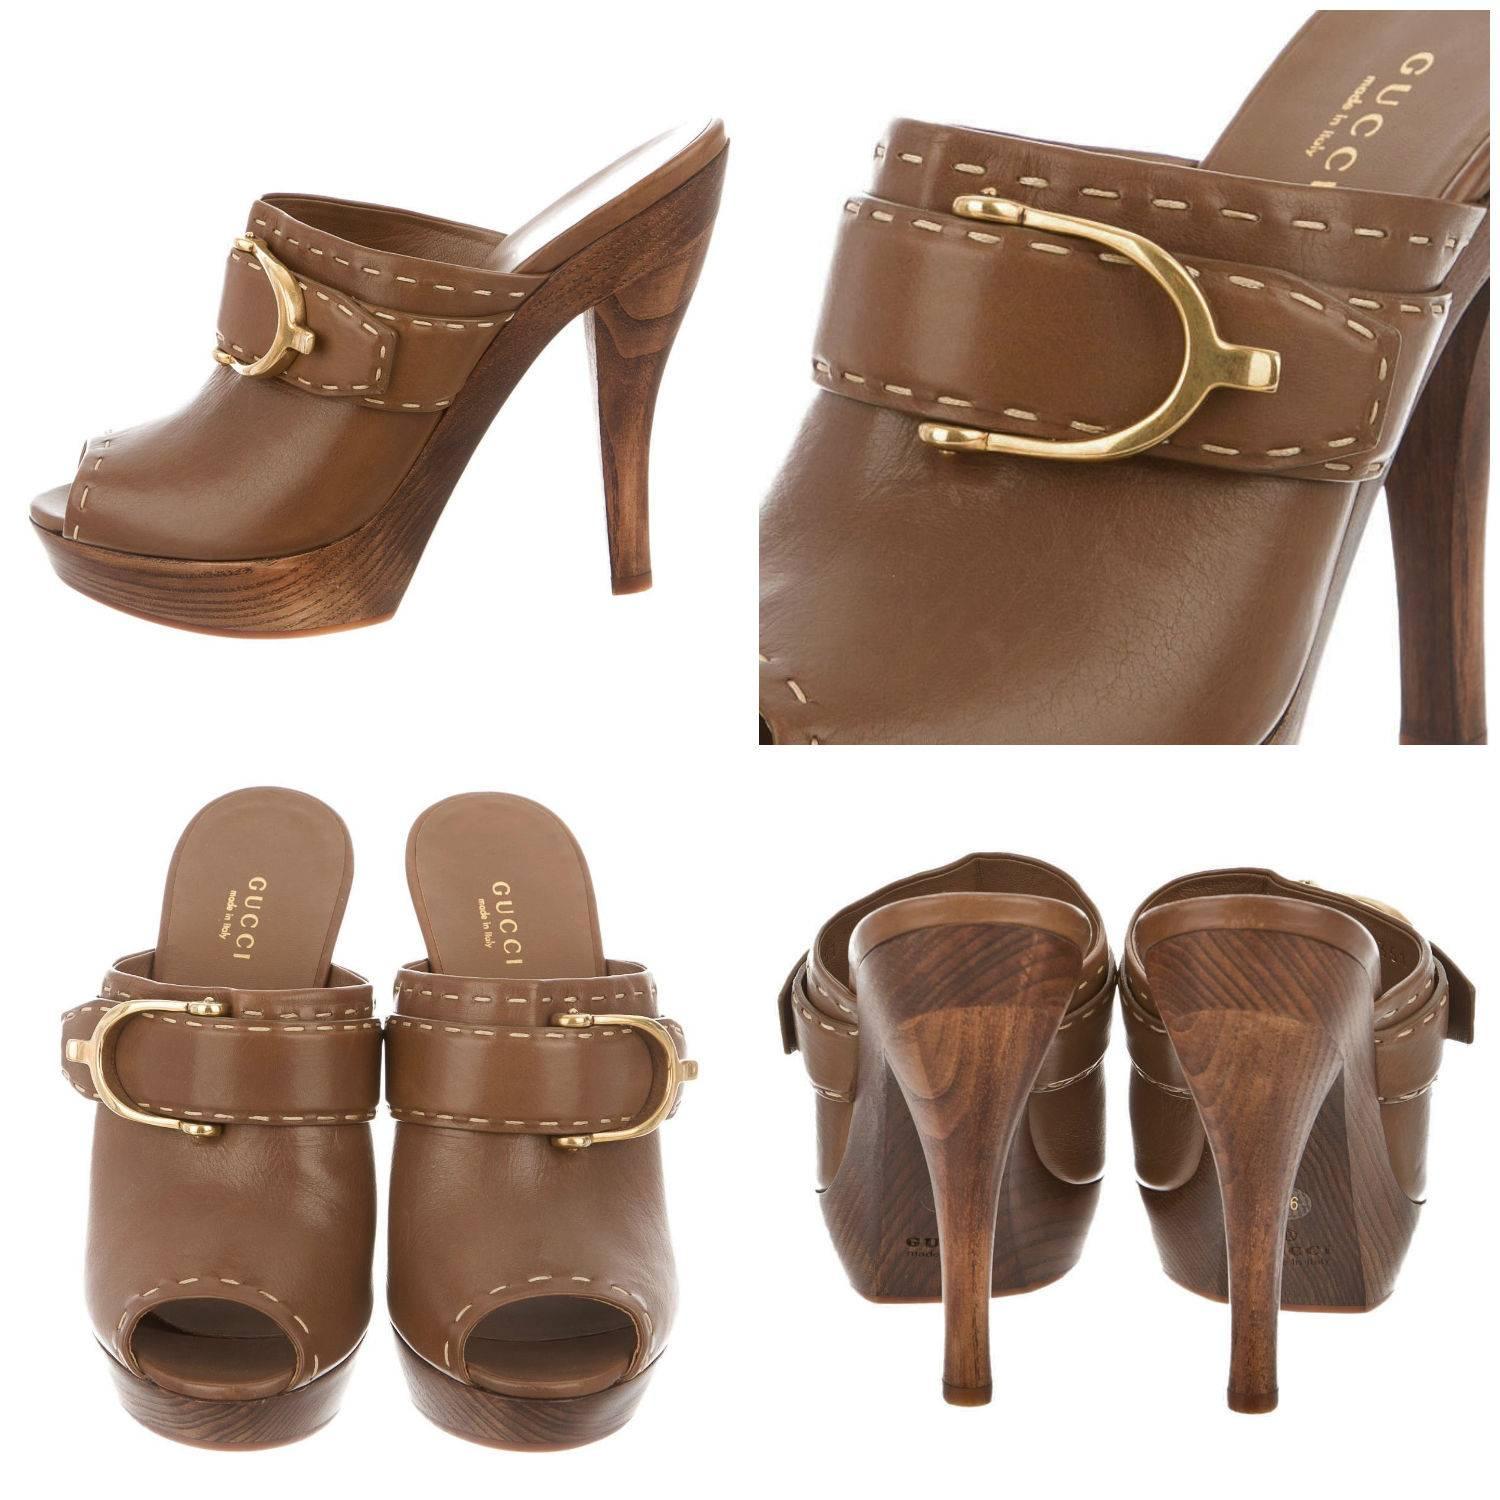 Leather Gucci Heels
Brand New
* Brown Leather Peep Toe
* Clogs ~ Mules
* Size: 36 
* Wooden Heel
* Contrast Stitching
* Gold Horsebit
* 5